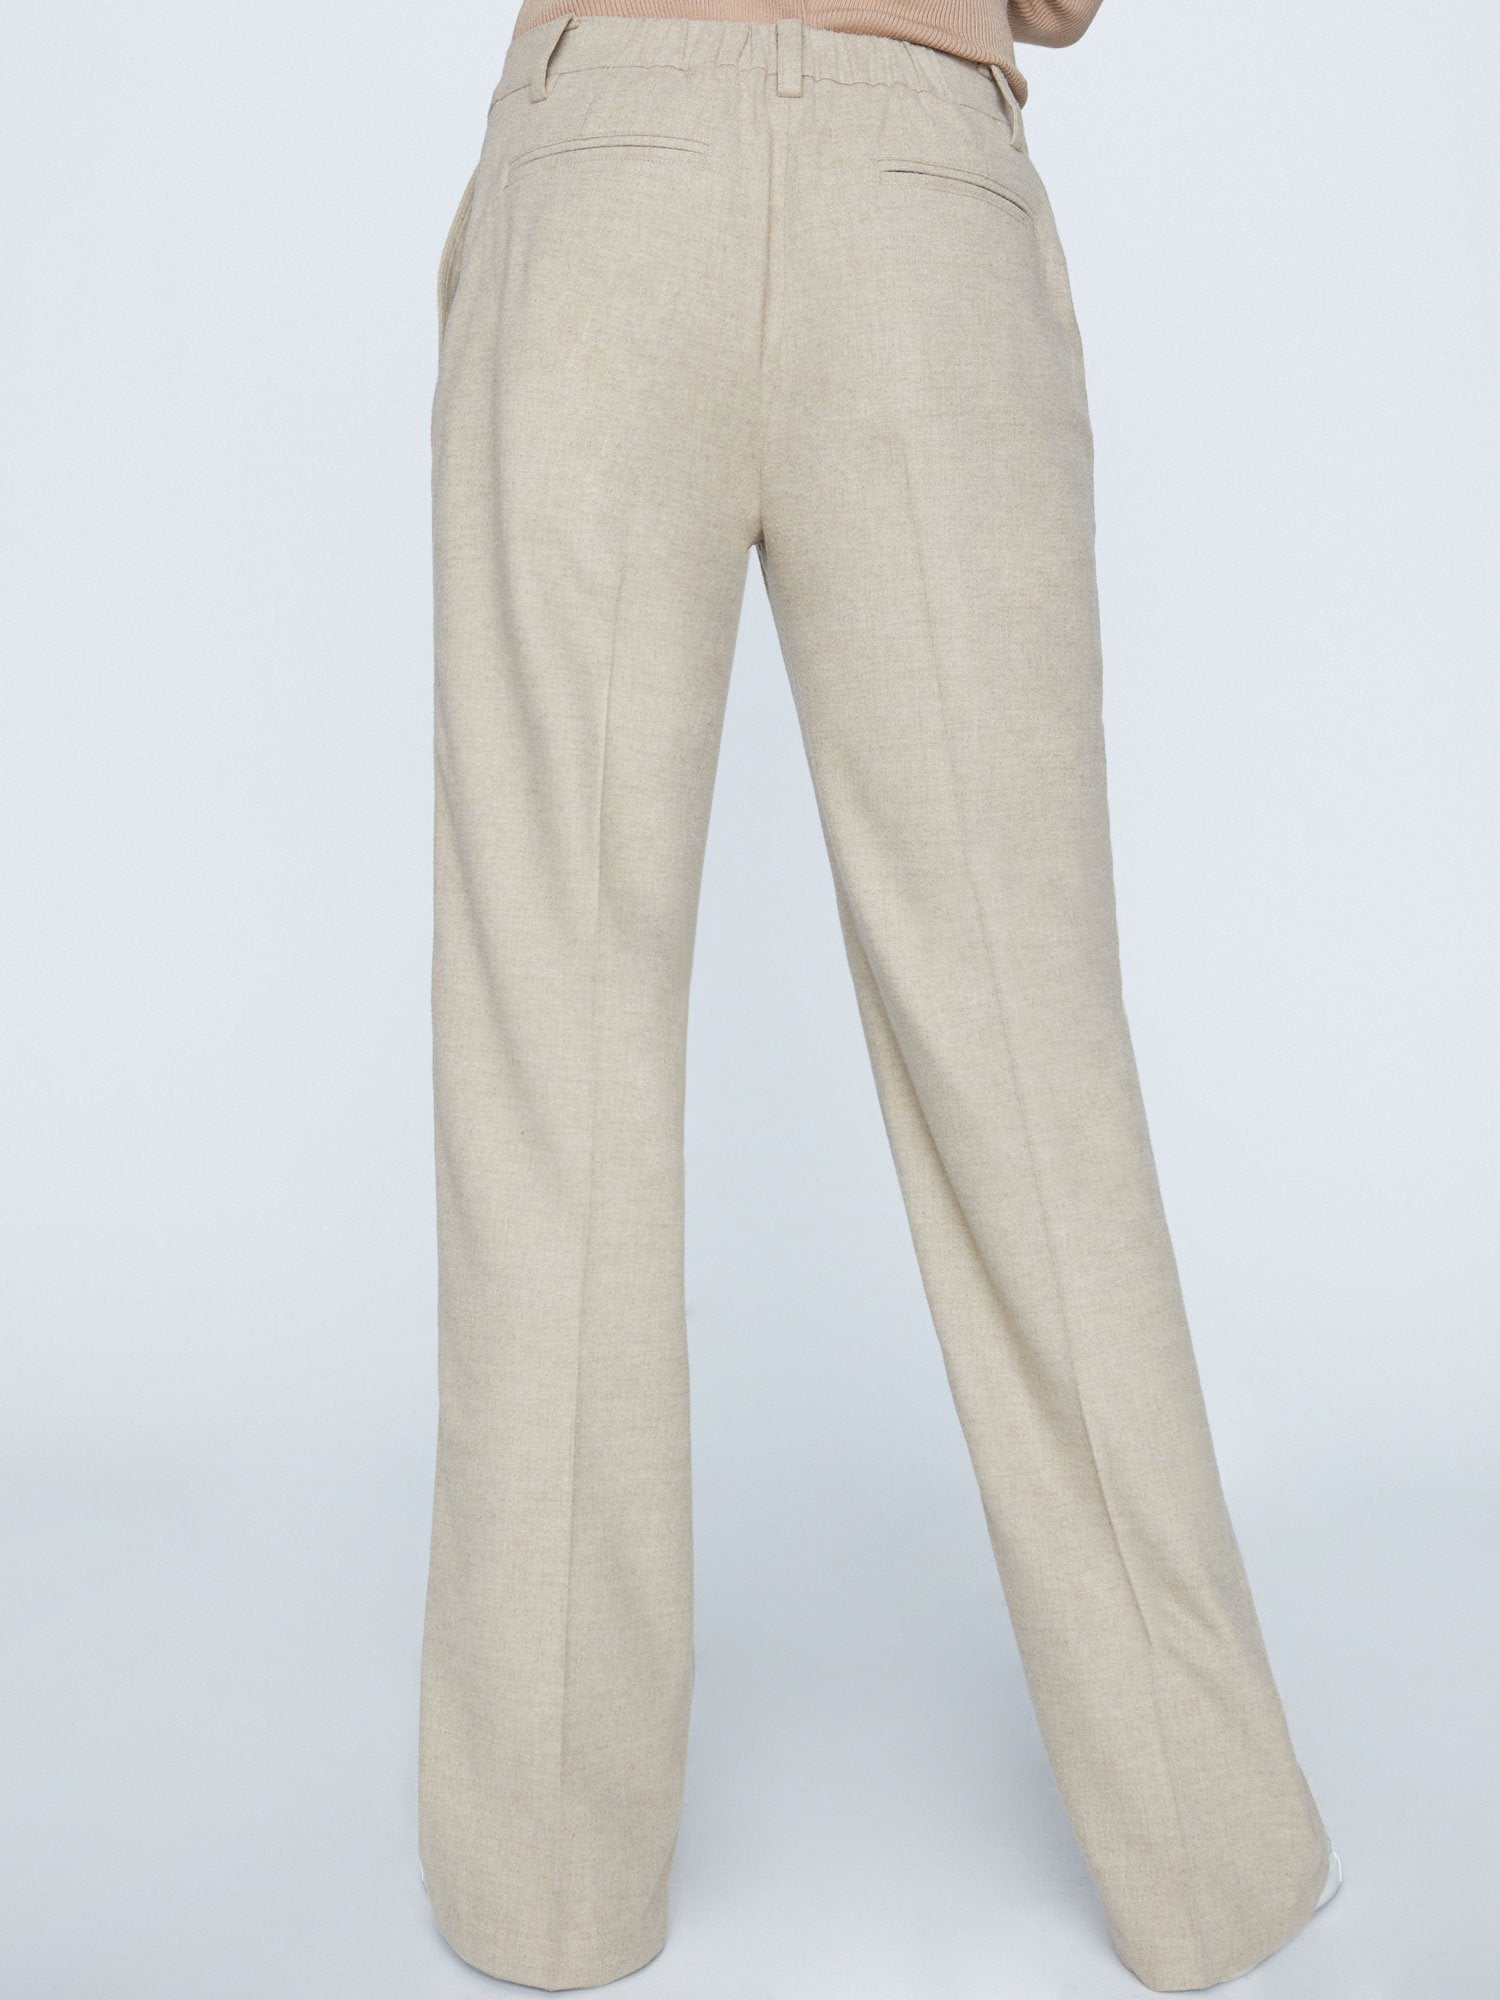 The Adel Pant